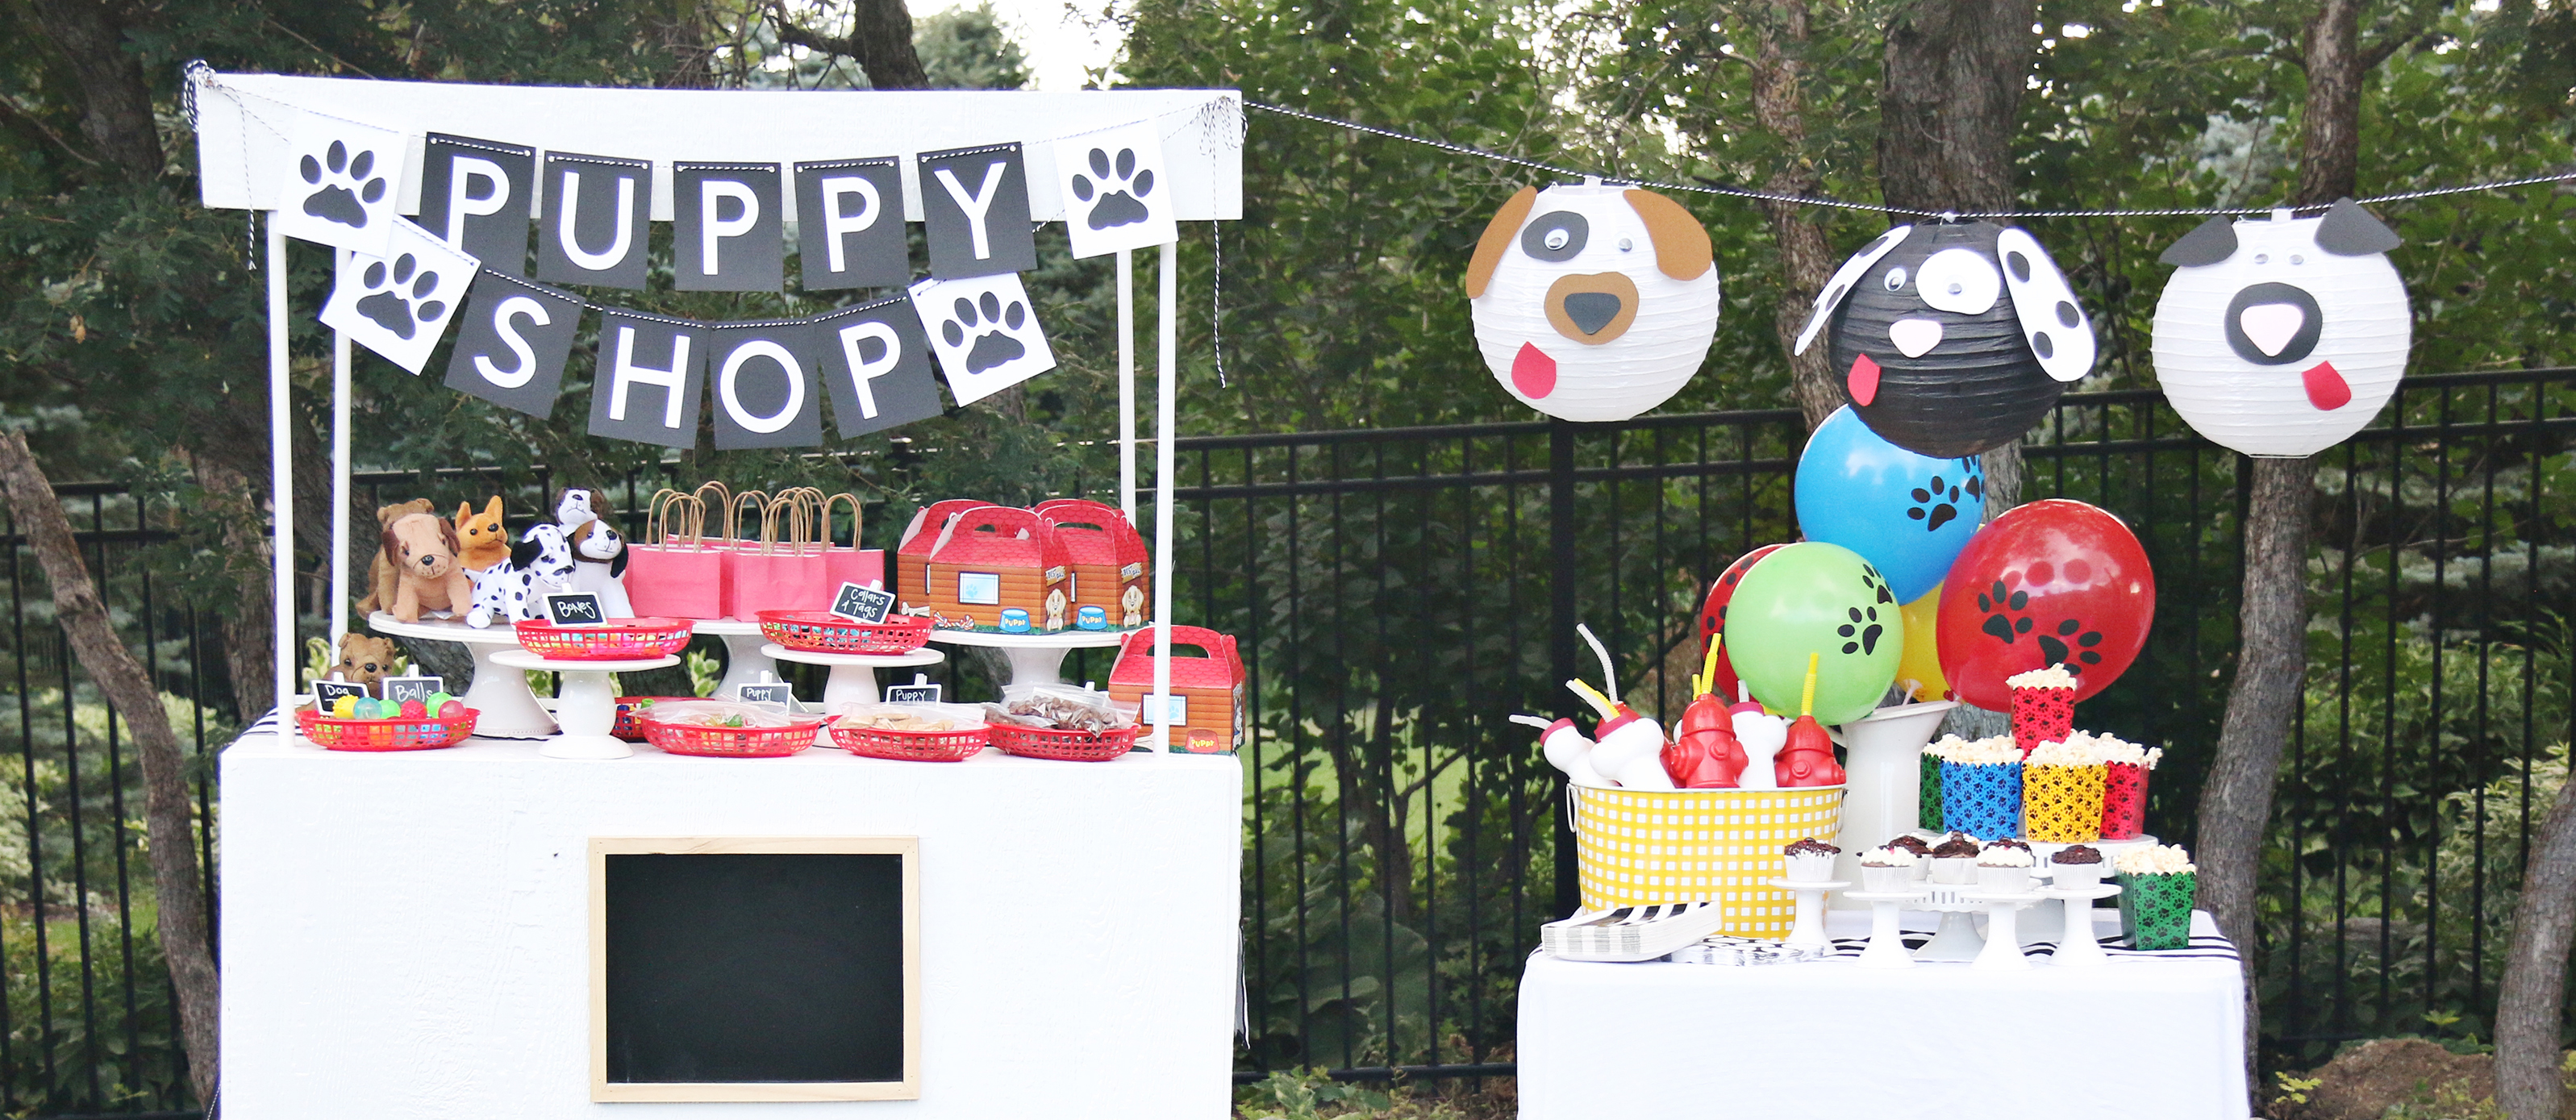 PUPPY PAWS Dog Love White Dessert Plate Birthday Party Supplies free shipping 